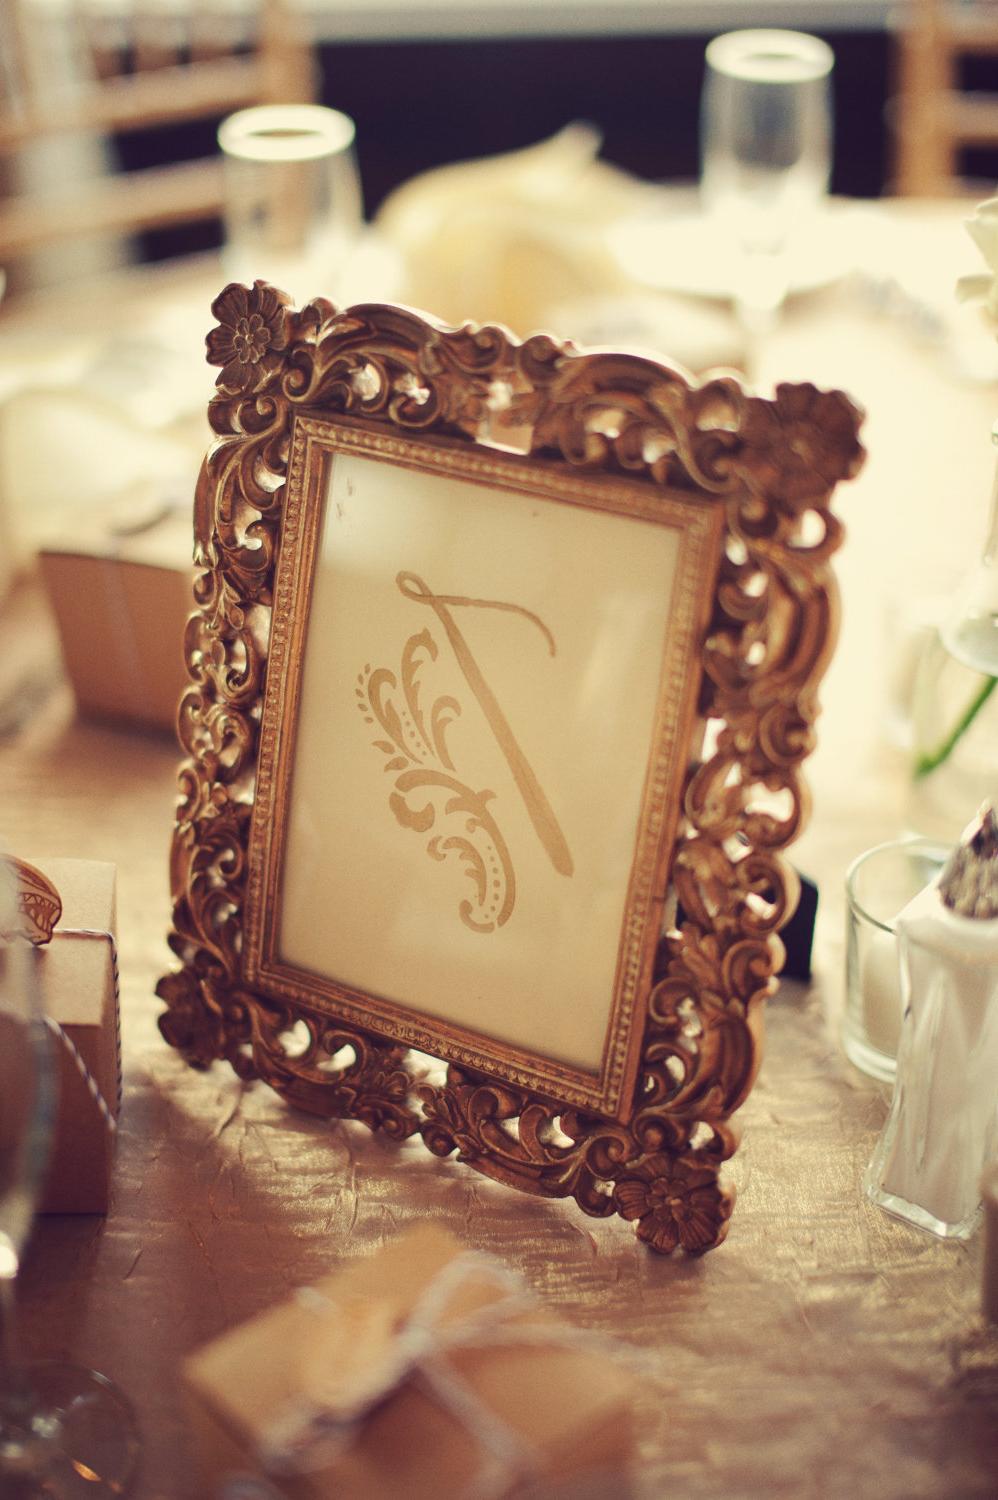 Gold Table Numbers for Vintage Wedding - 16 Tables. From shabbymechic